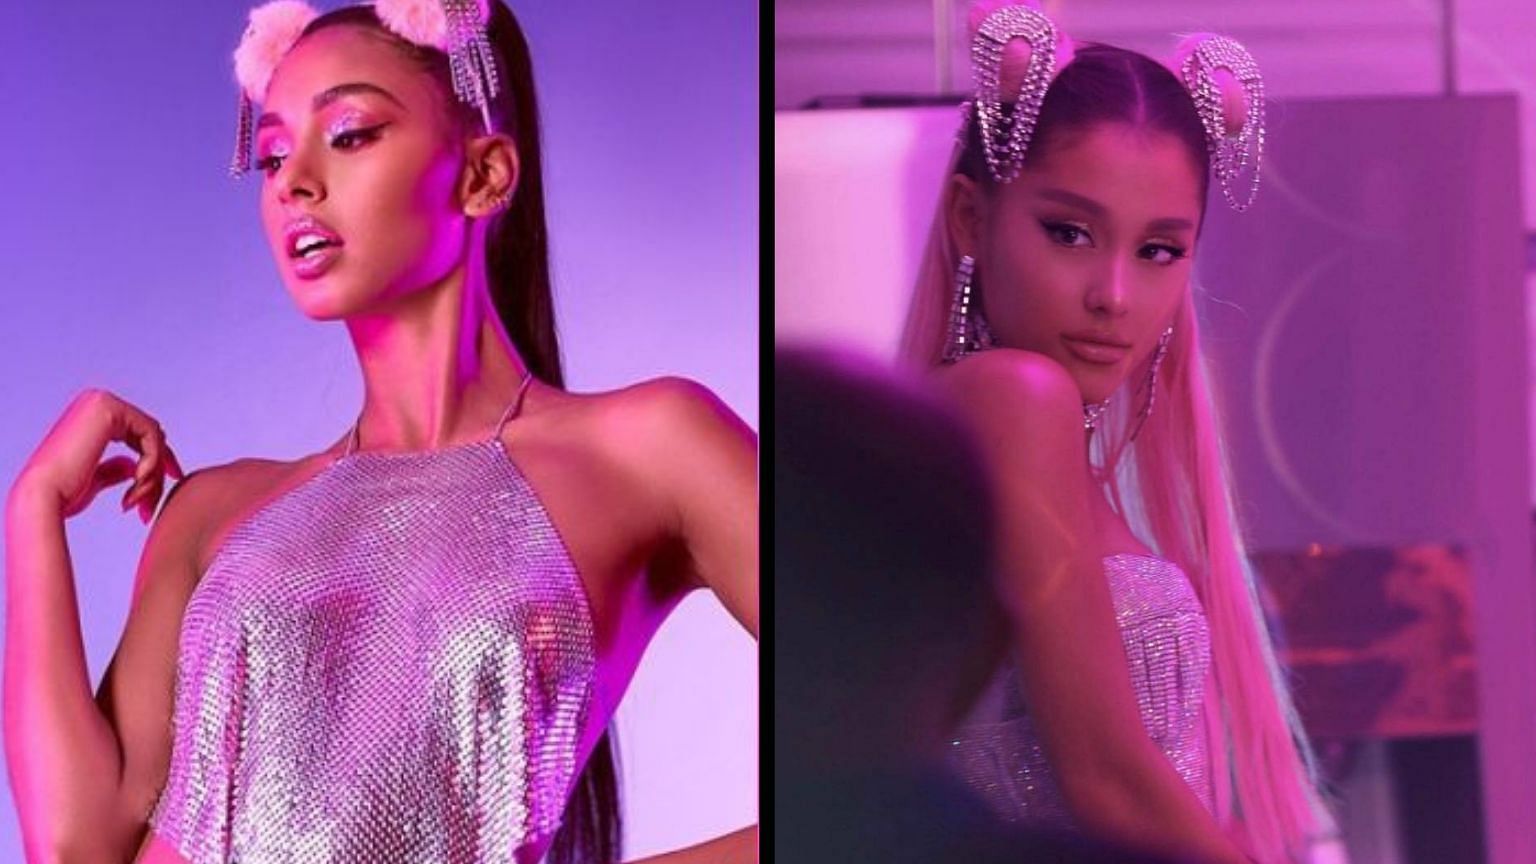 Forever 21 ad campaign (L) and Ariana Grande from her single '7 Rings' (R)